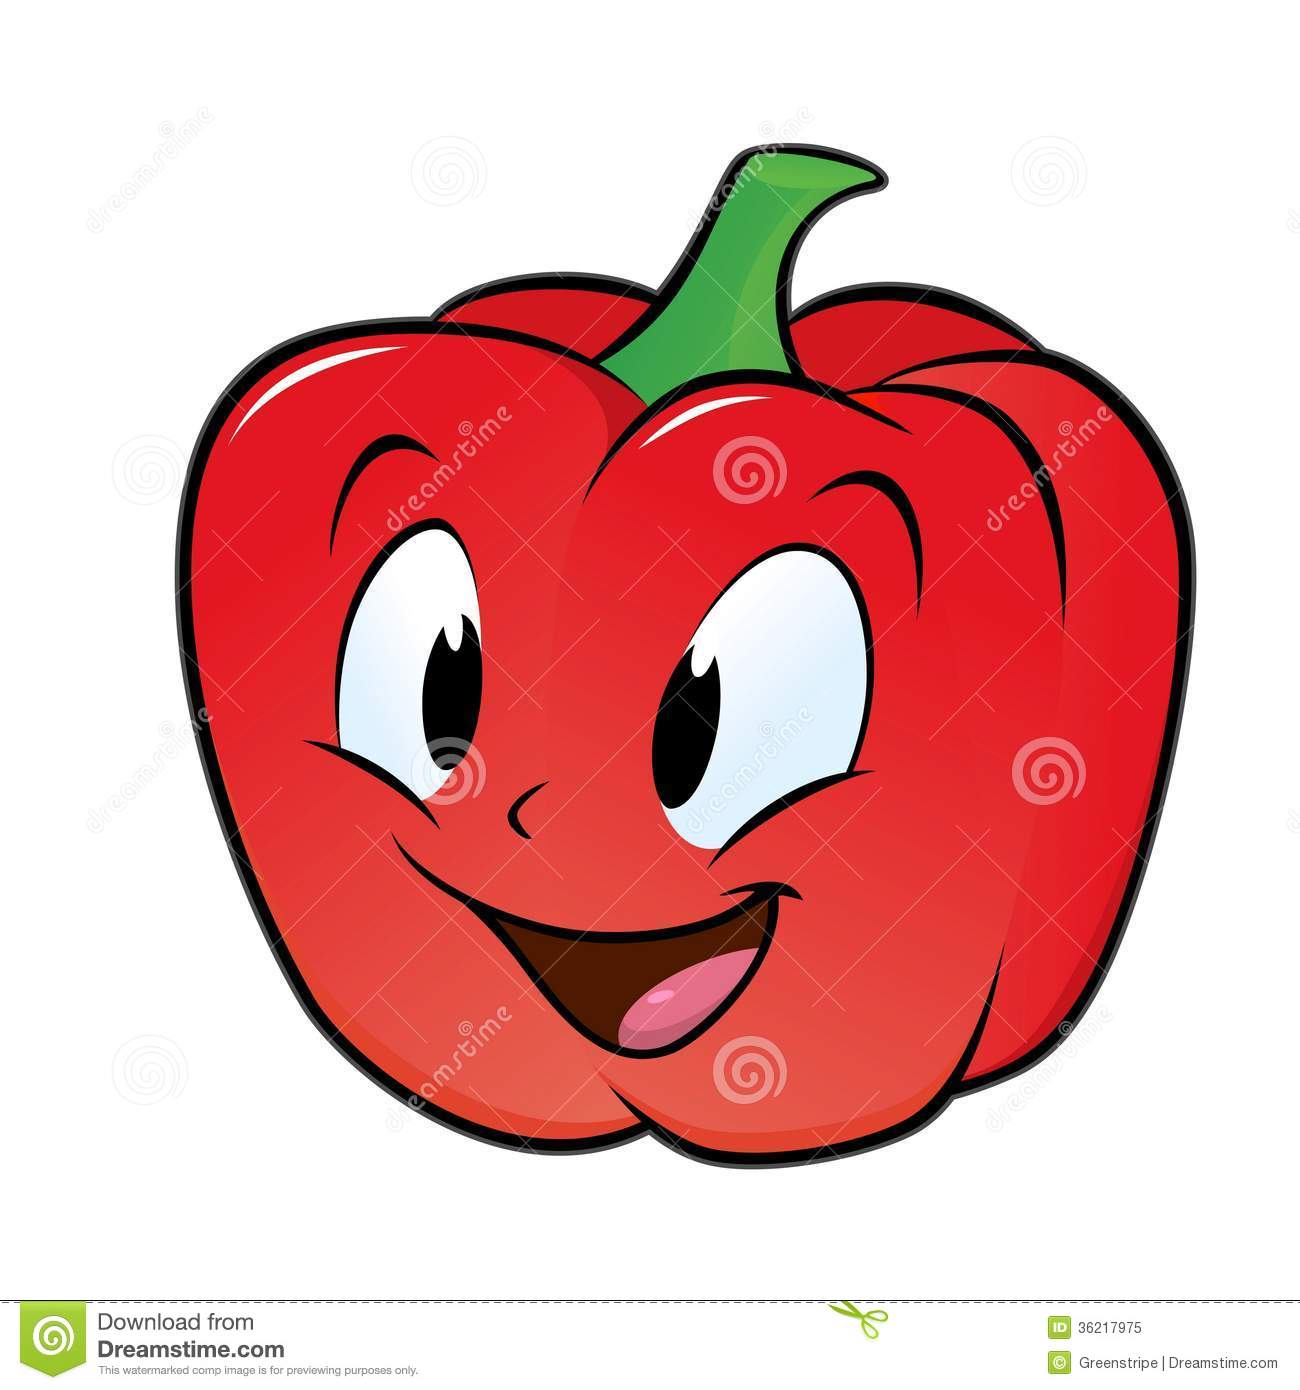 Cartoon Bell Pepper  Isolated Objects For Design Element 